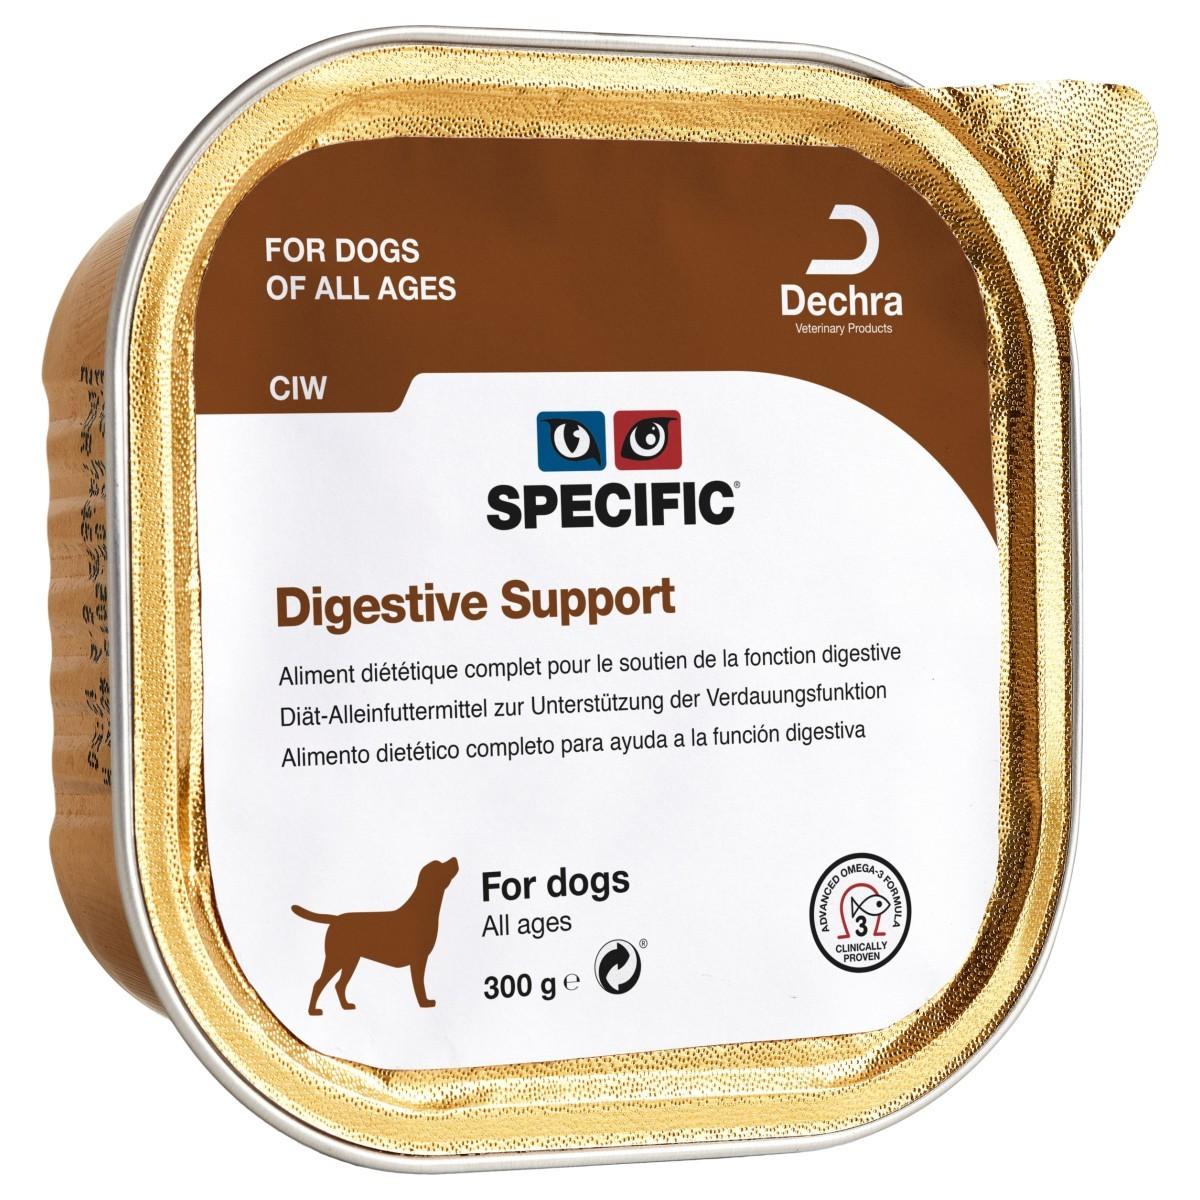 Selected image for SPECIFIC DECHRA Pašteta za pse digestive support 300g